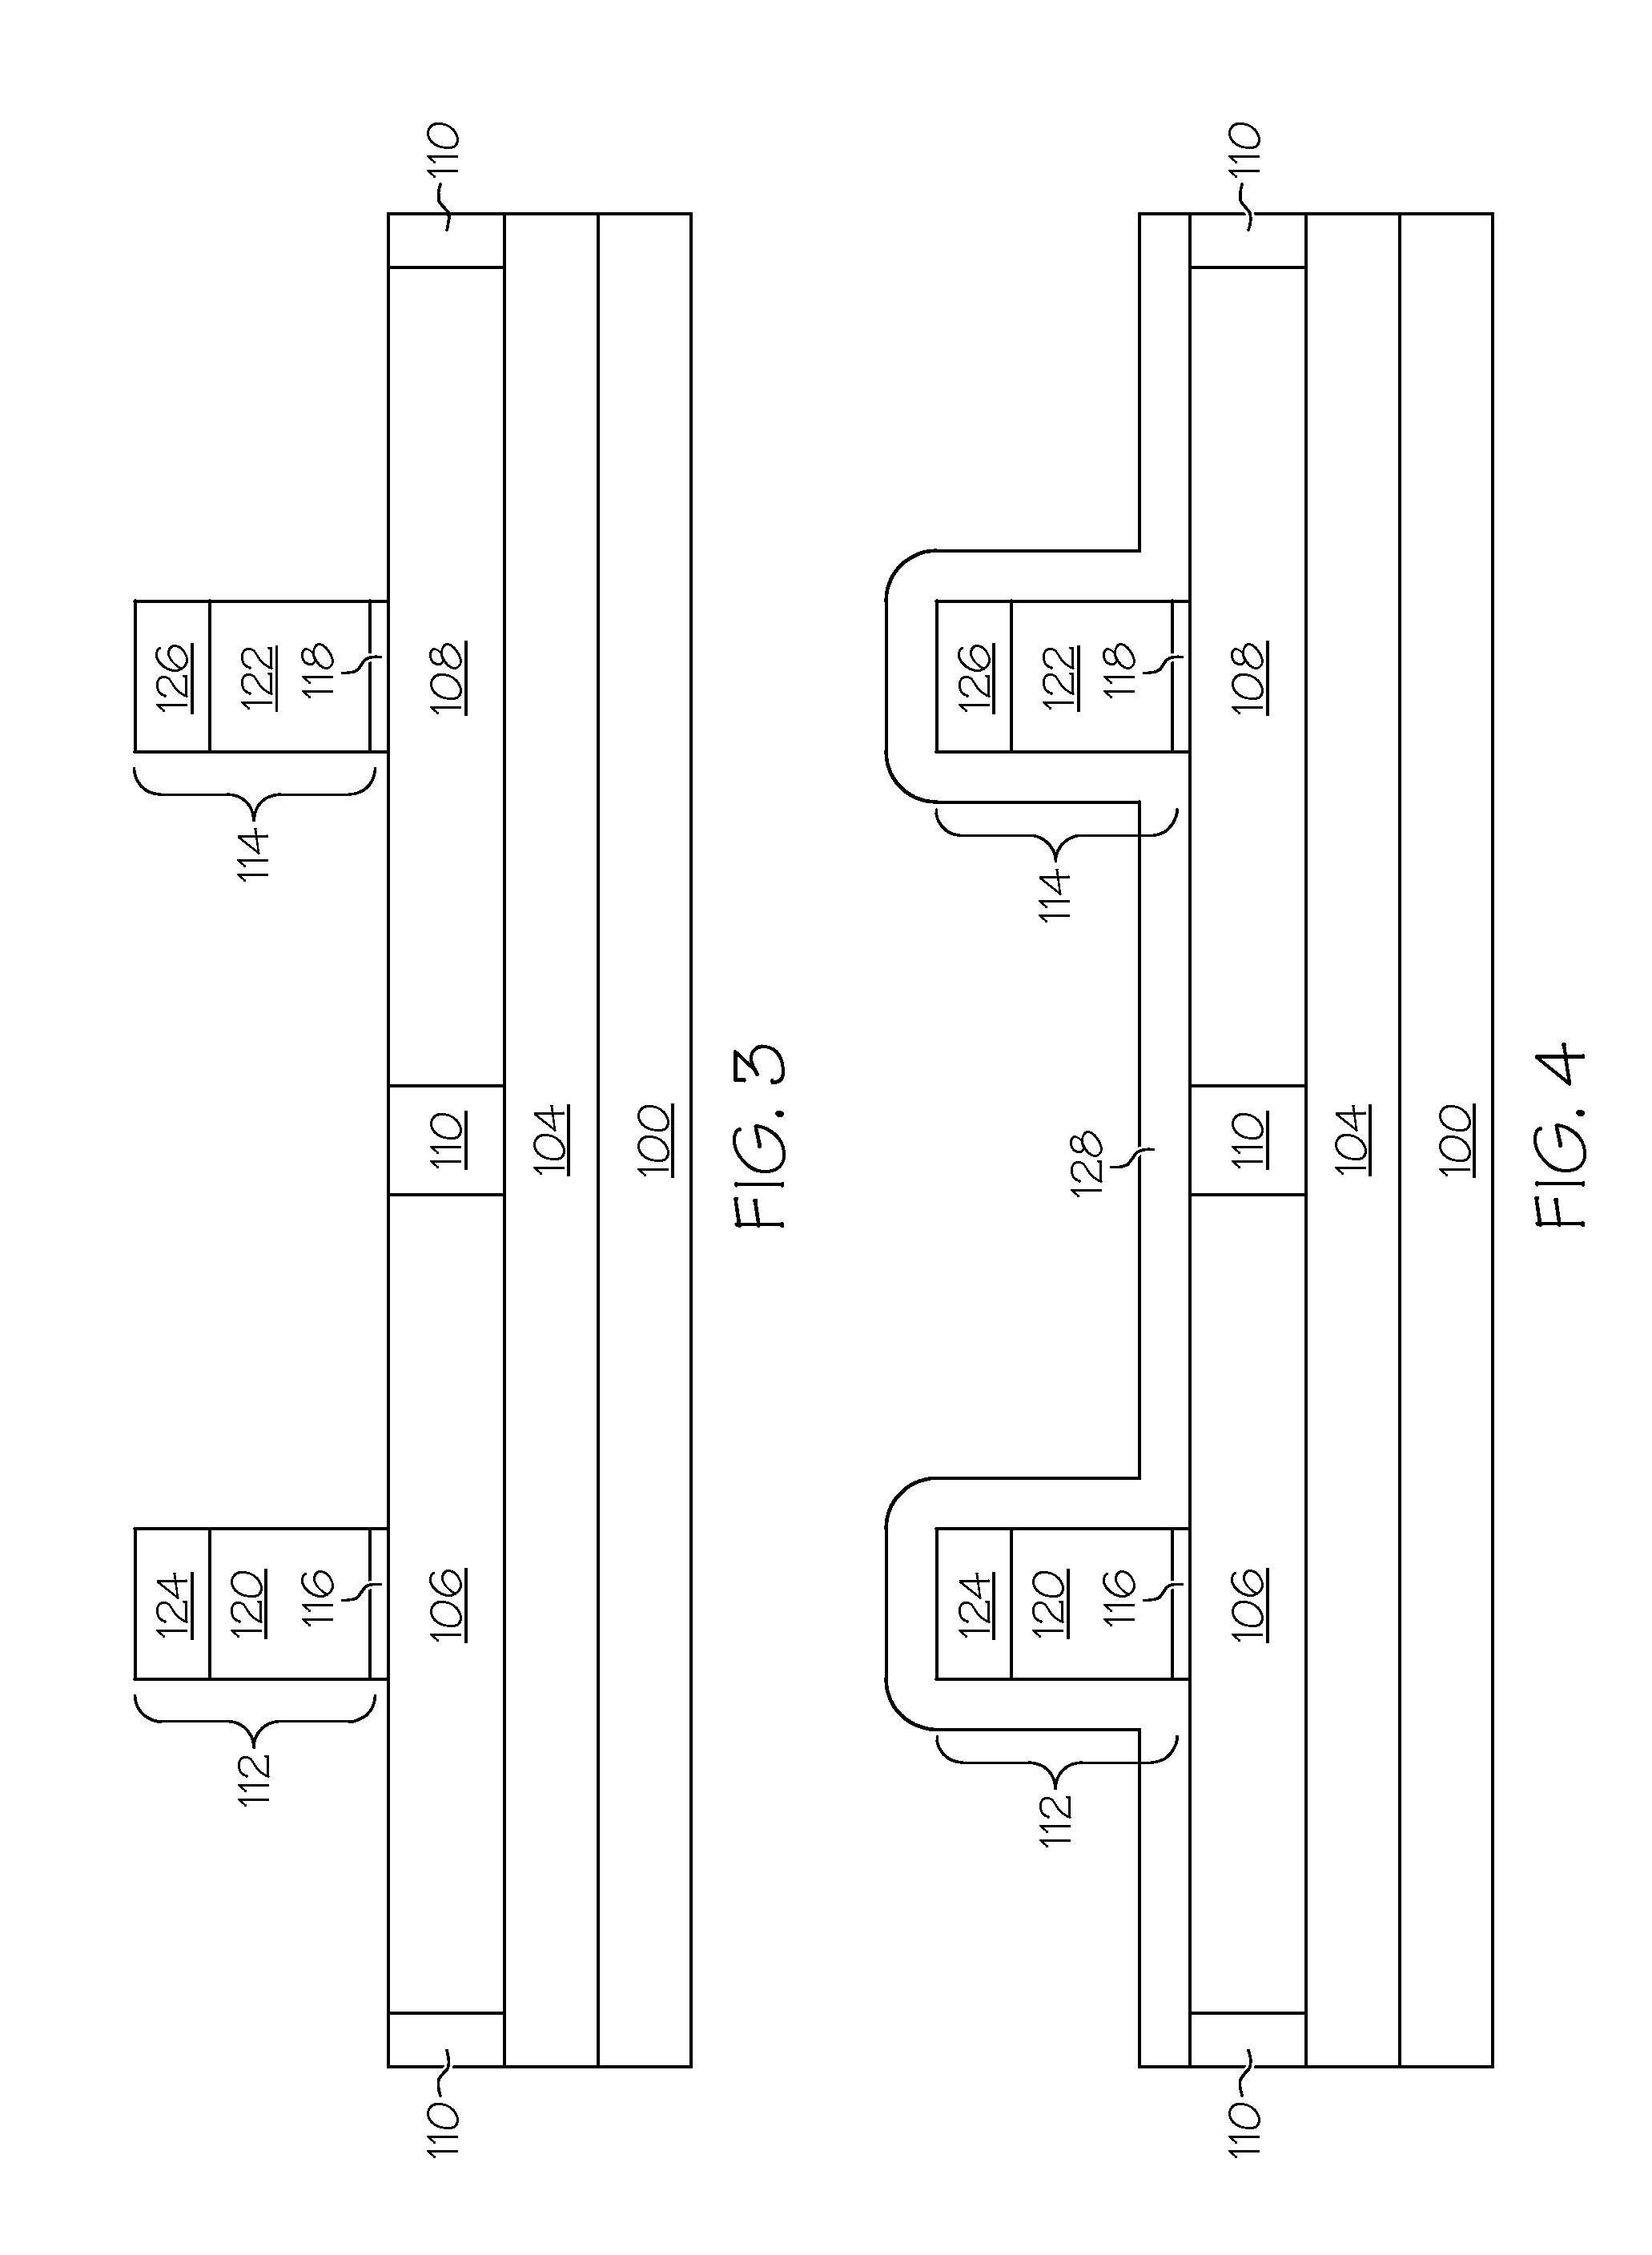 Method for fabricating a semiconductor device with self-aligned stressor and extension regions